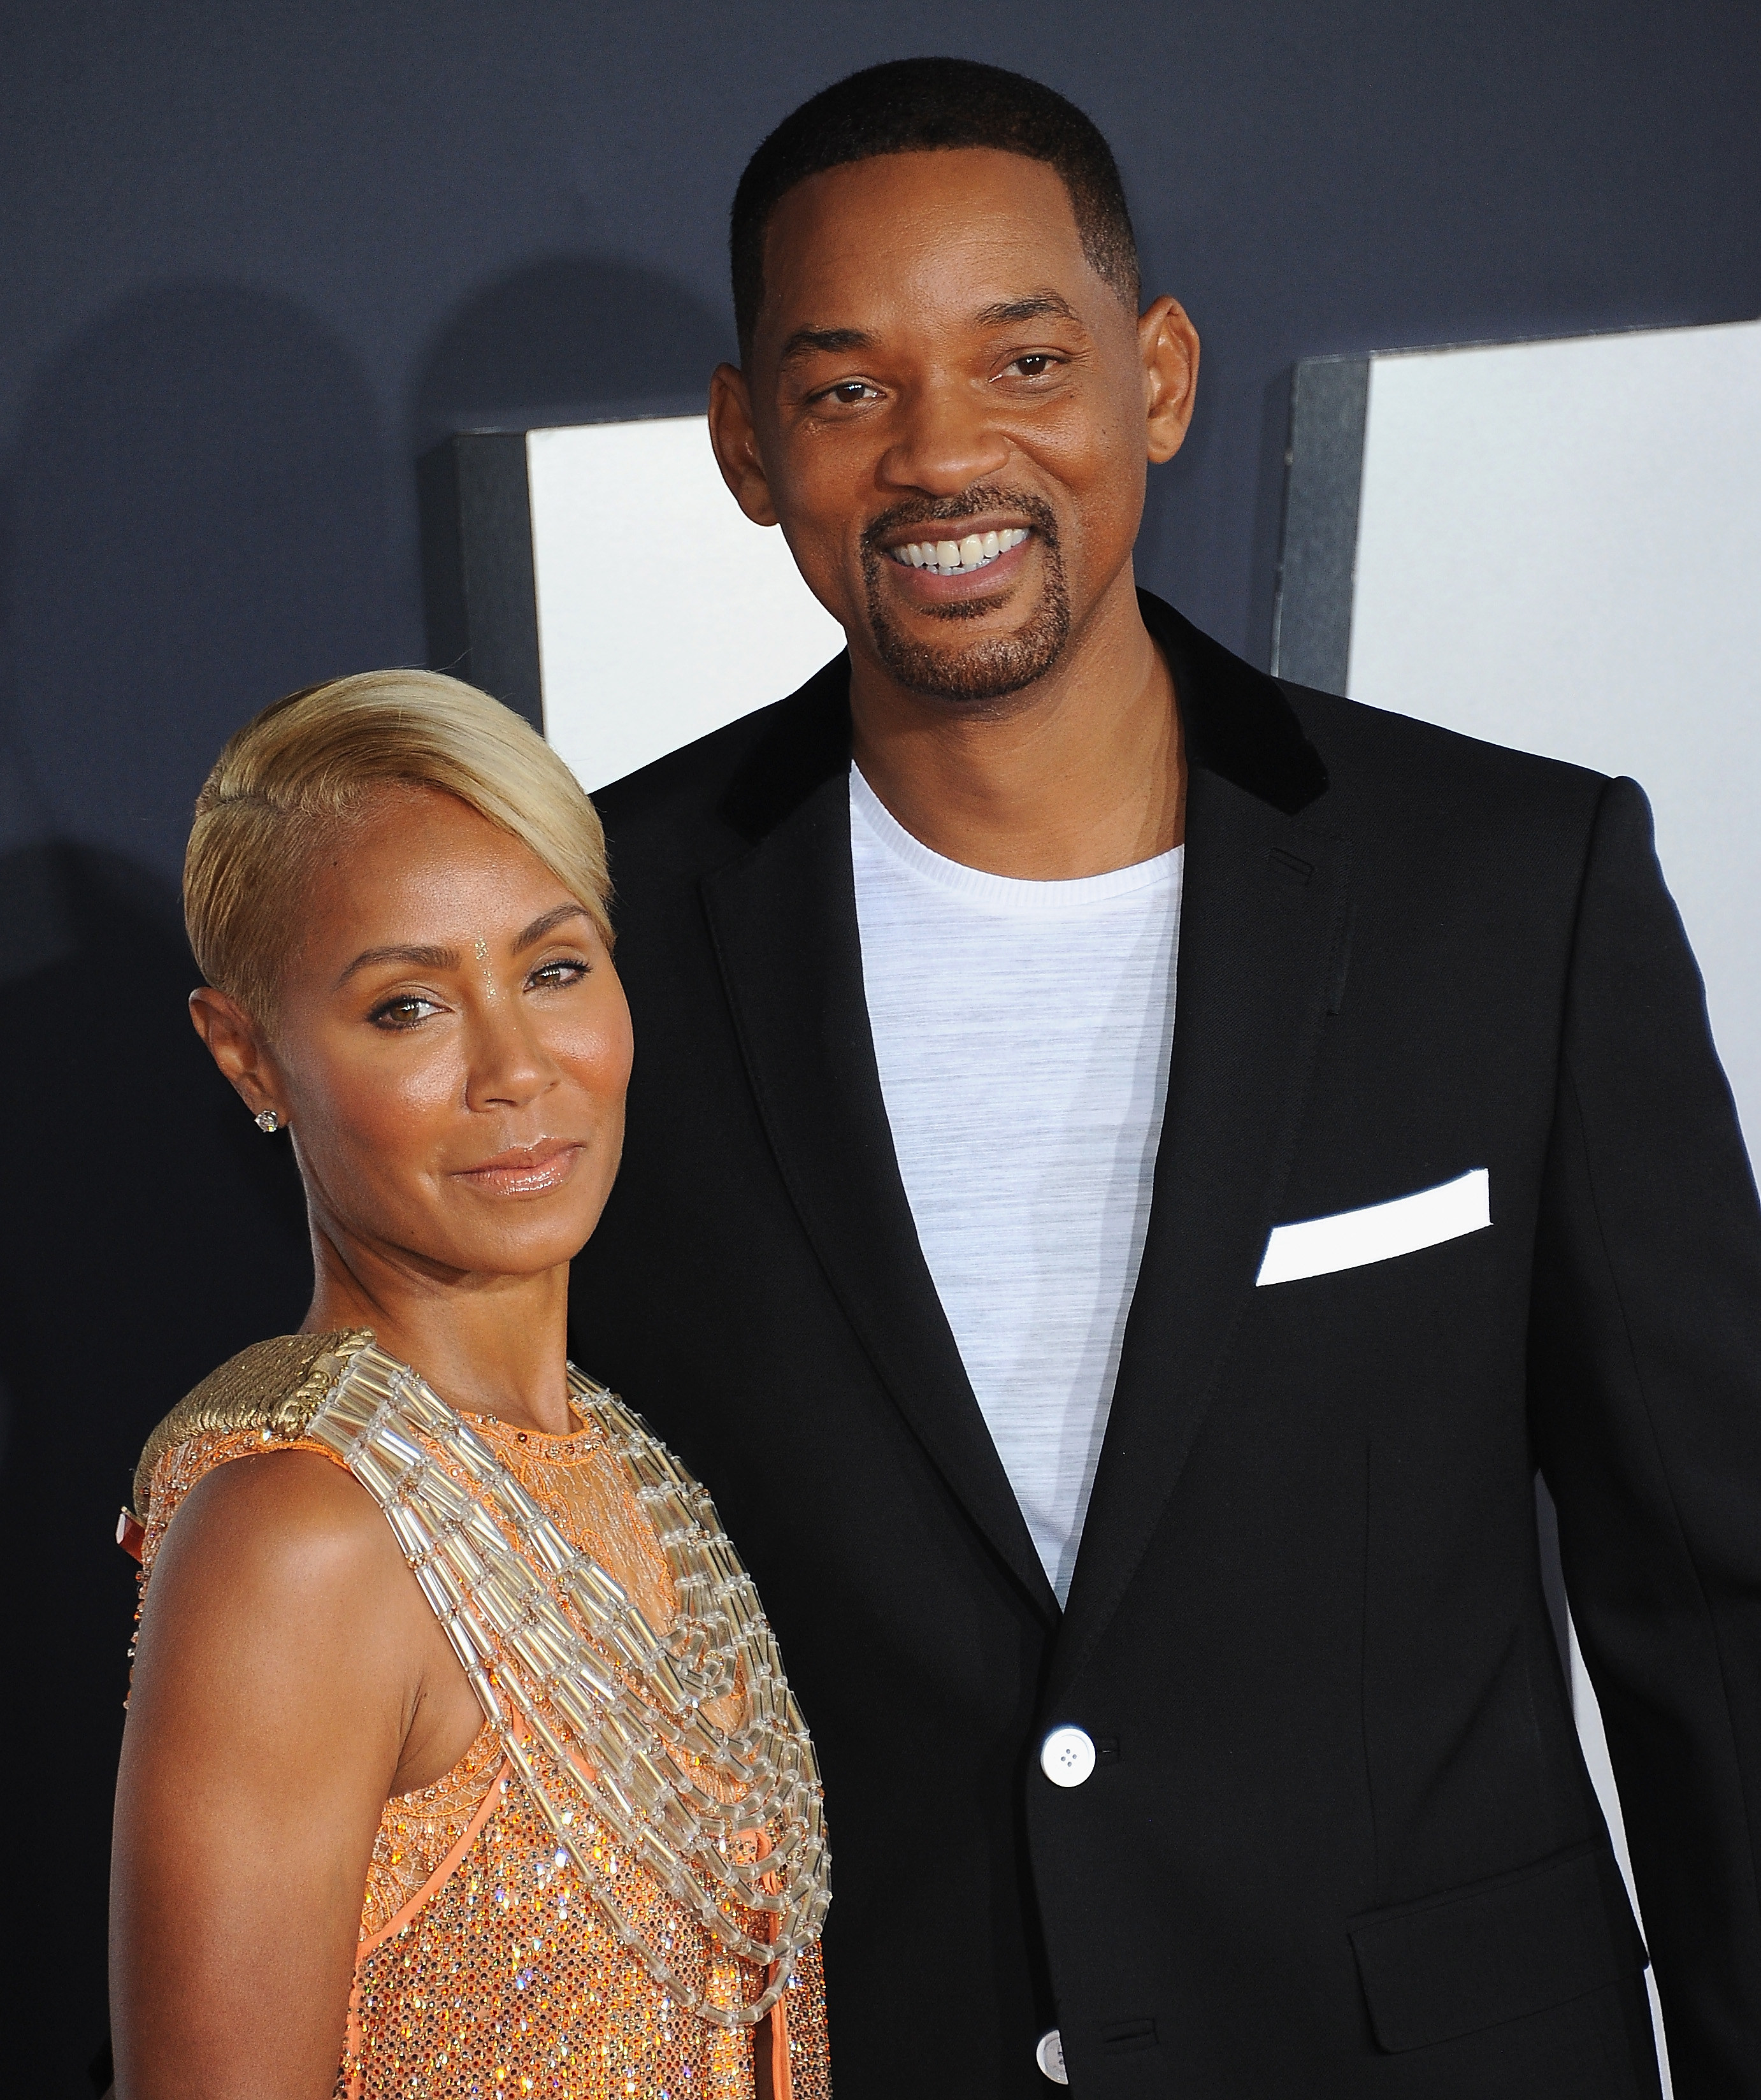 Will Smith and Jada Pinkett Smith's controversial relationship